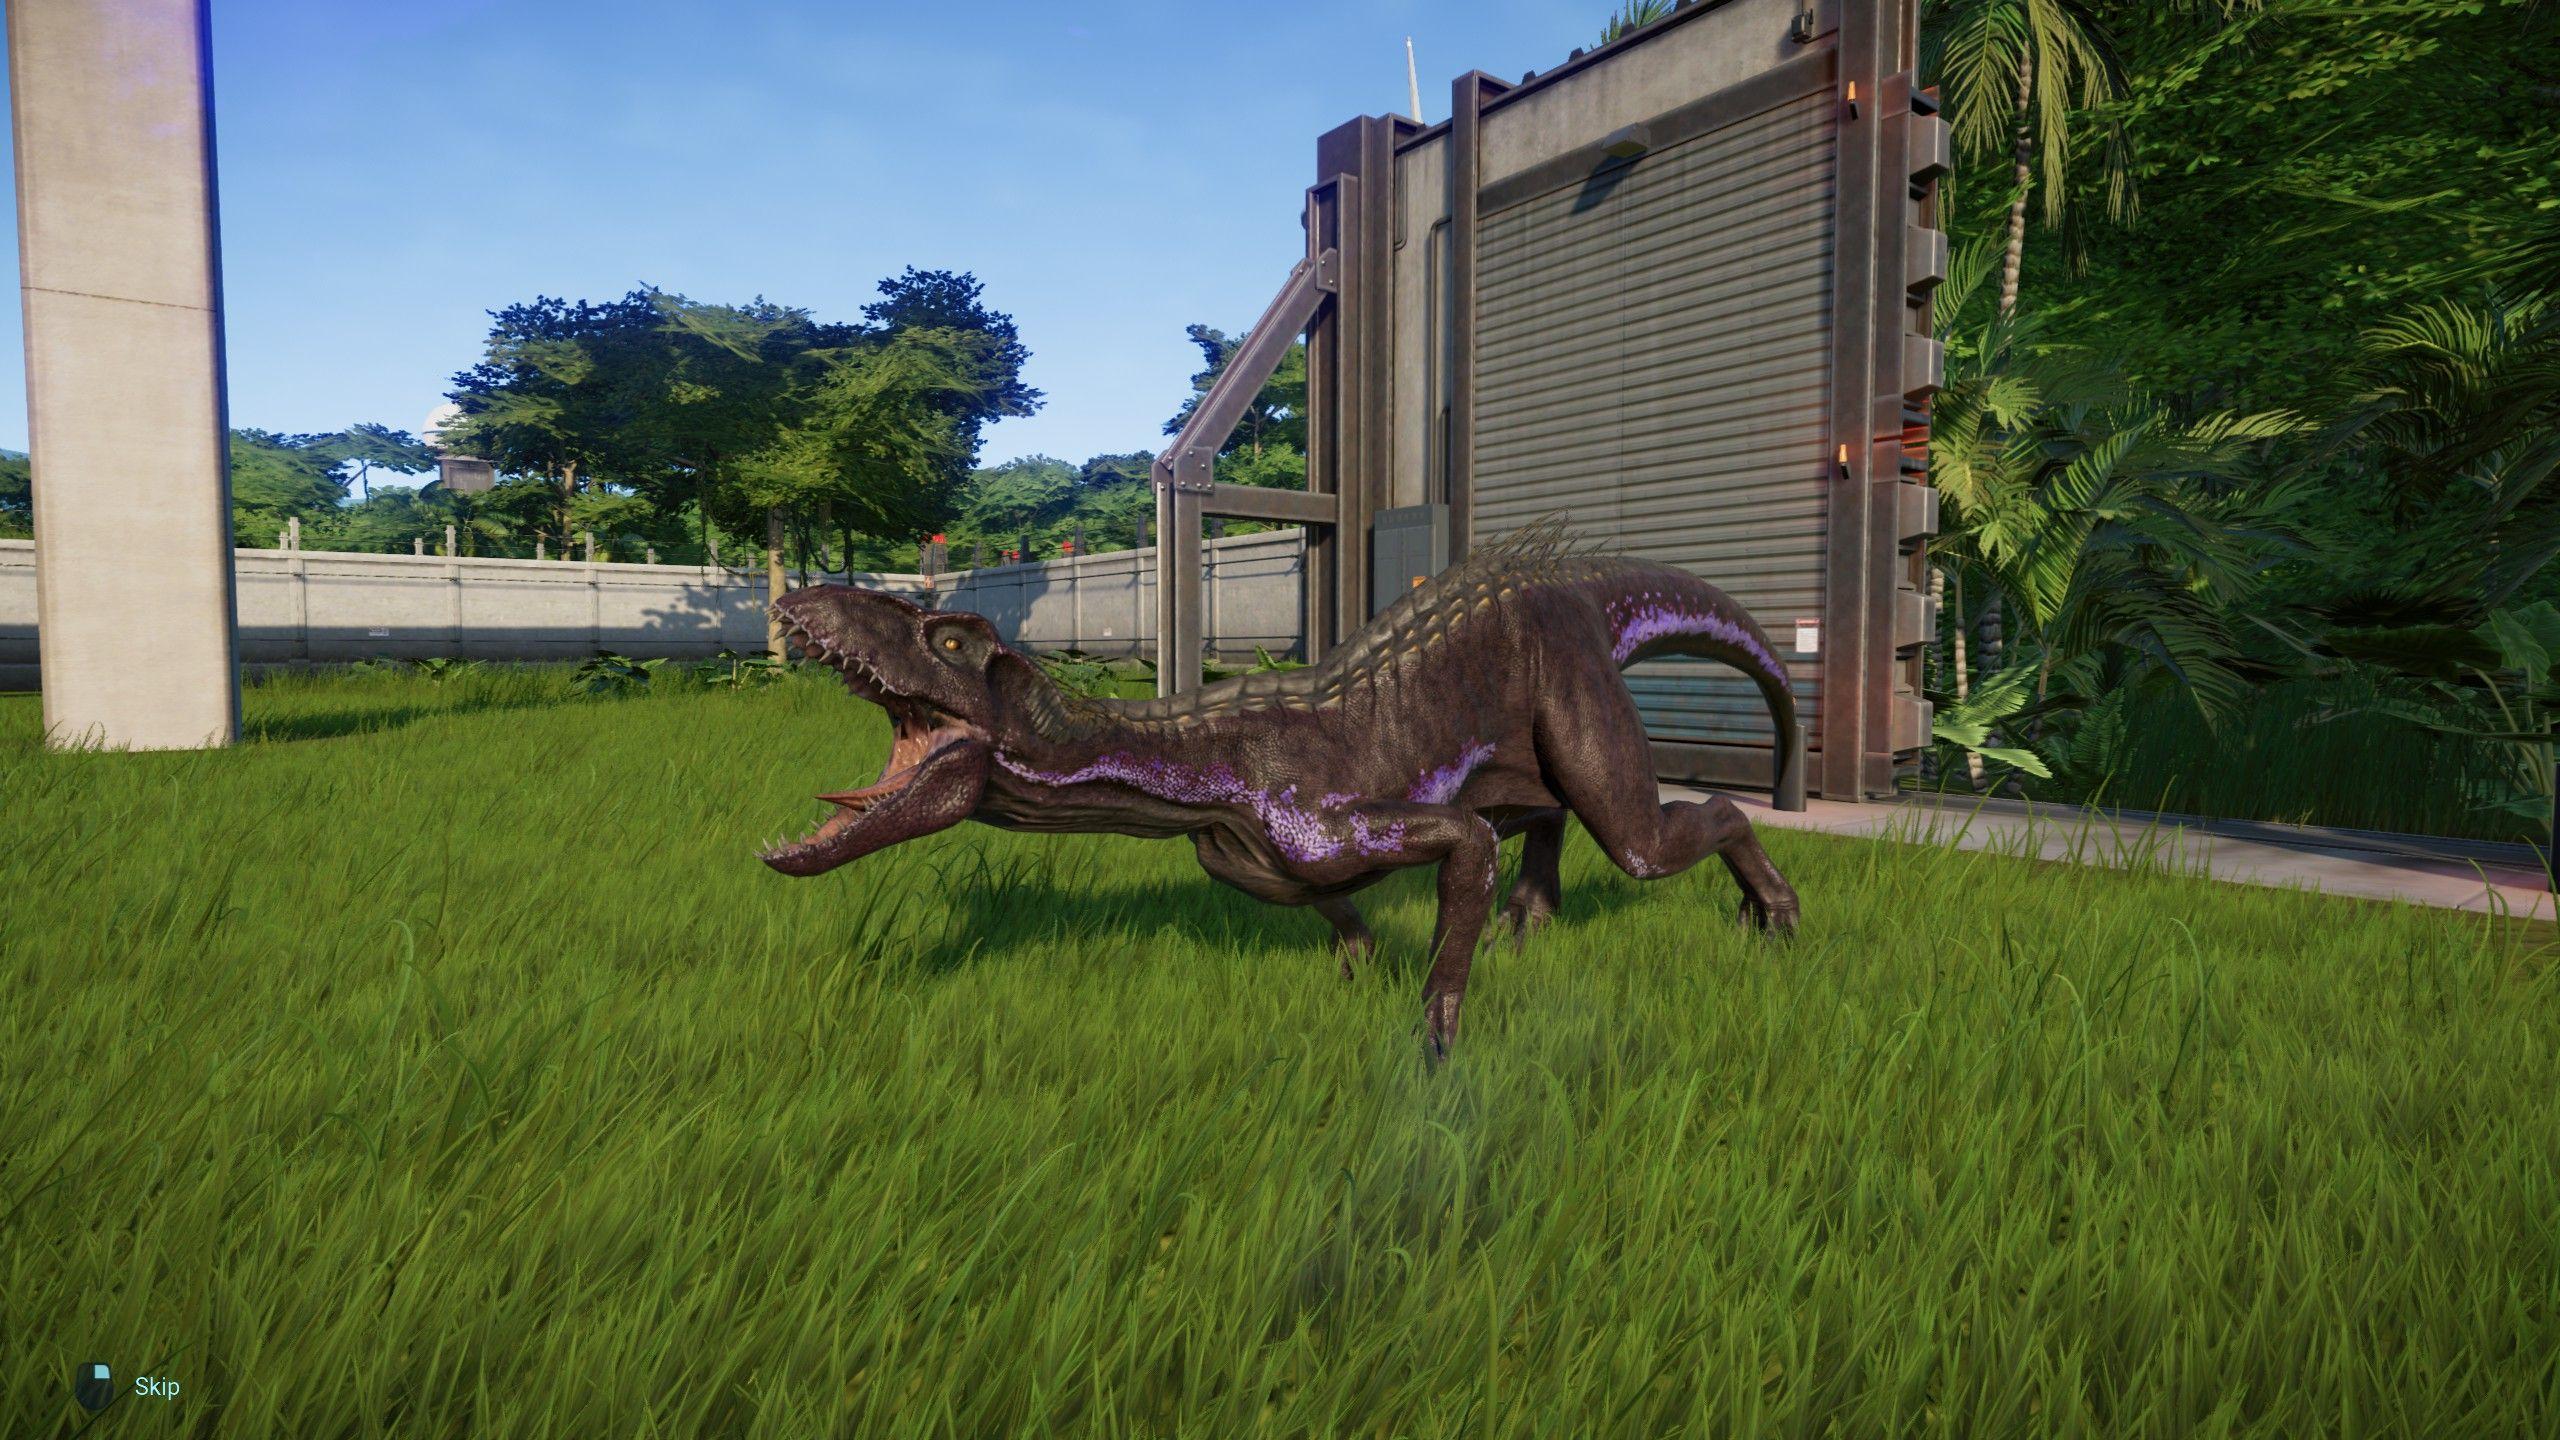 New Indoraptor is awesome!